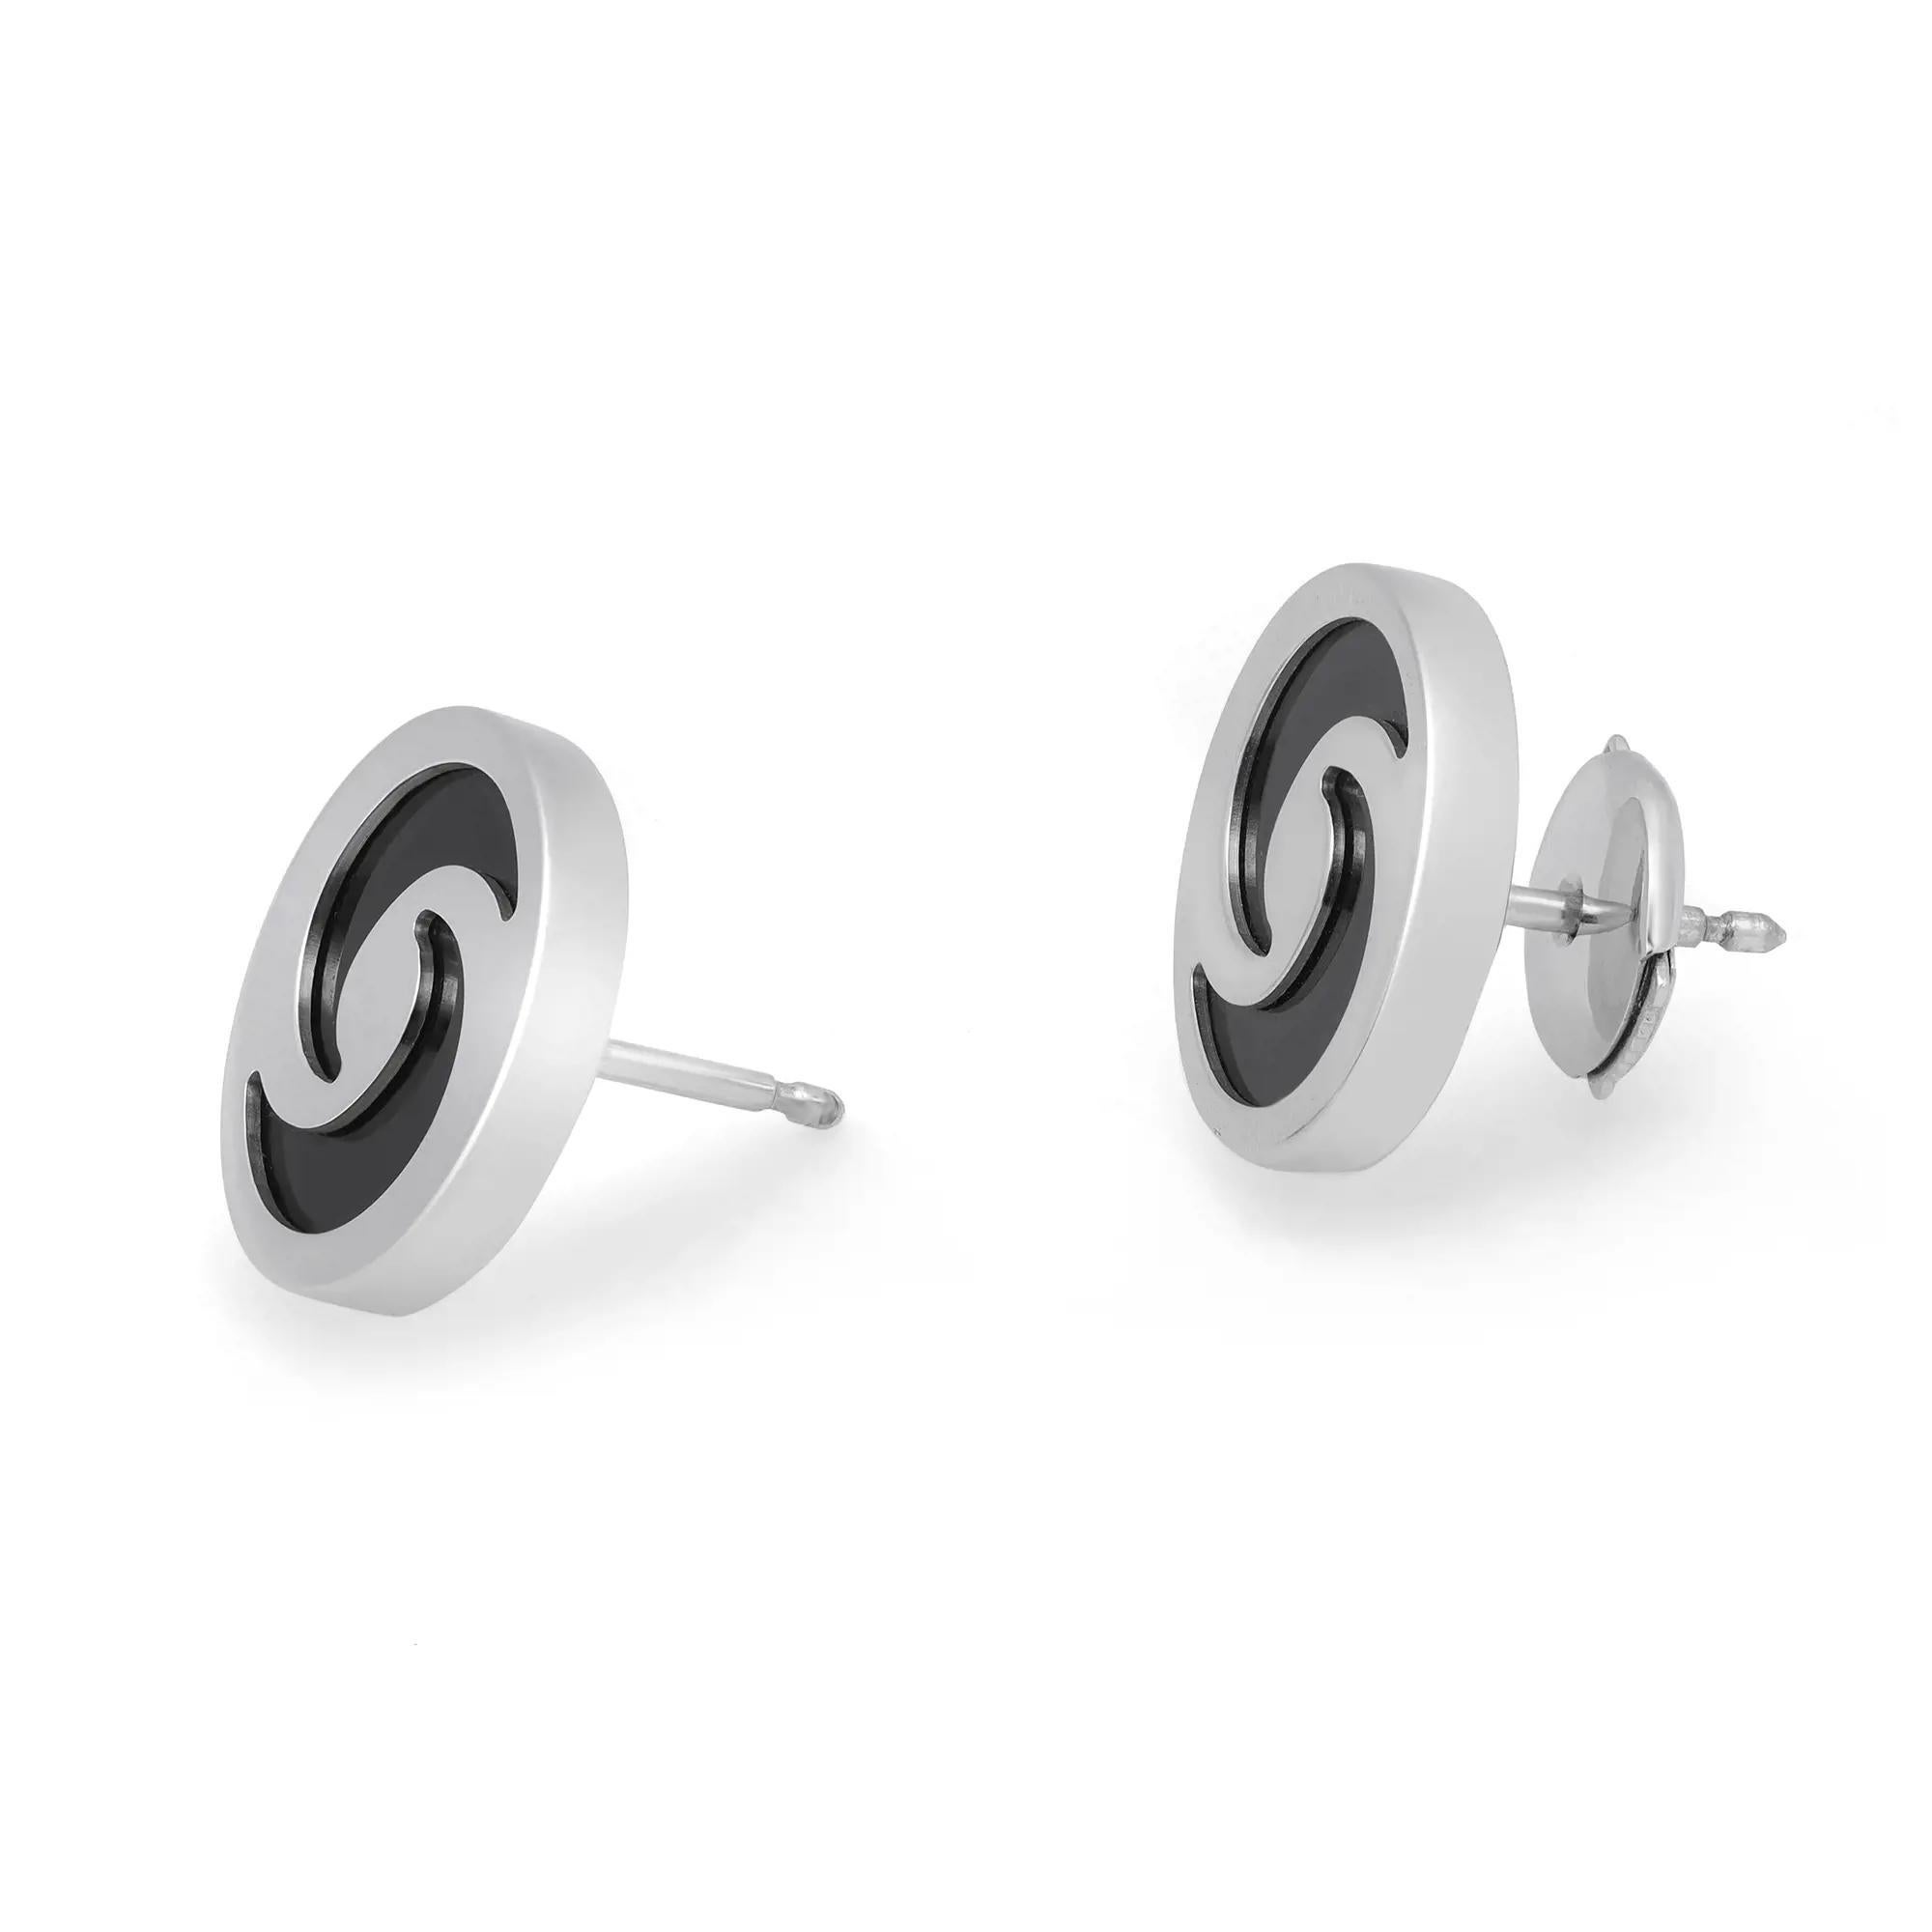 These round stud earrings come from the Optic Illusion collection by Bvlgari. Well crafted in 18K white gold with black Onyx. These earrings feature a round white gold frame with swirl design showing the black Onyx. Measurement: 13mm. Thickness: 2.2